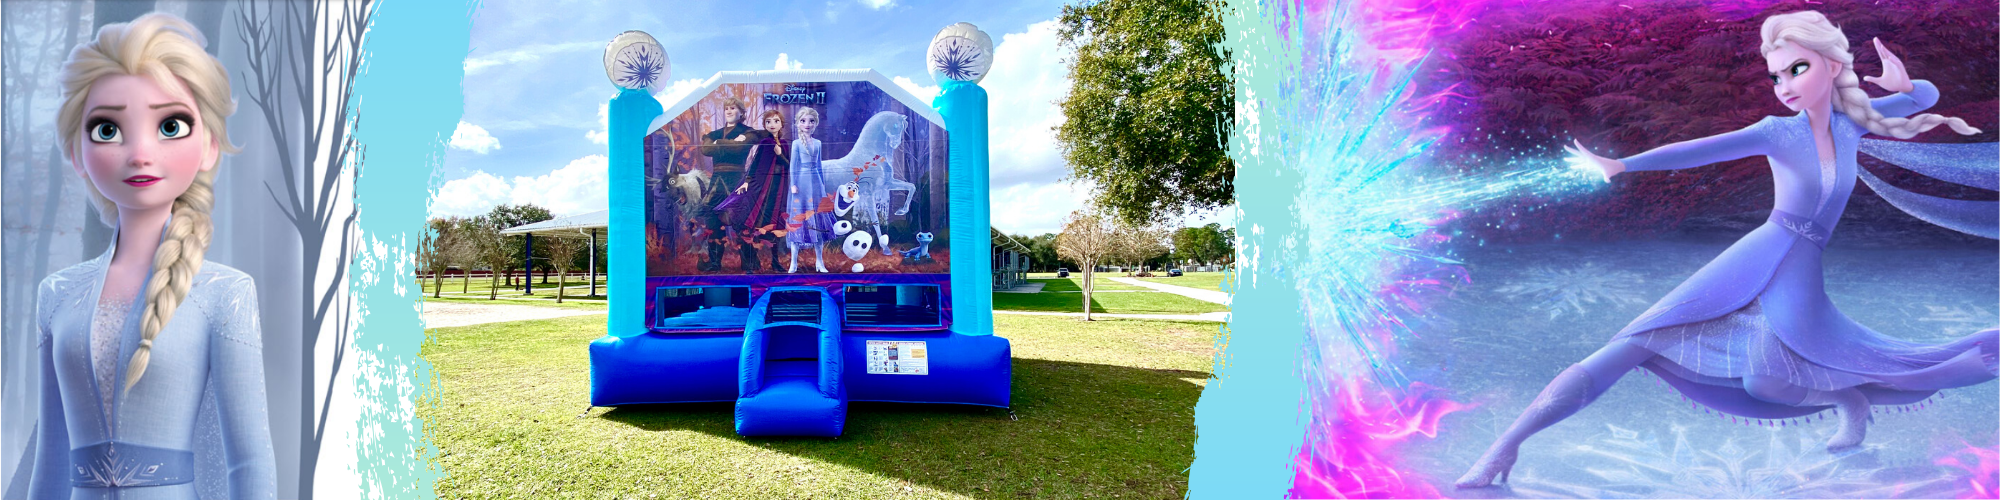 Princess Elsa shooting ice at the Frozen 2 Bounce House